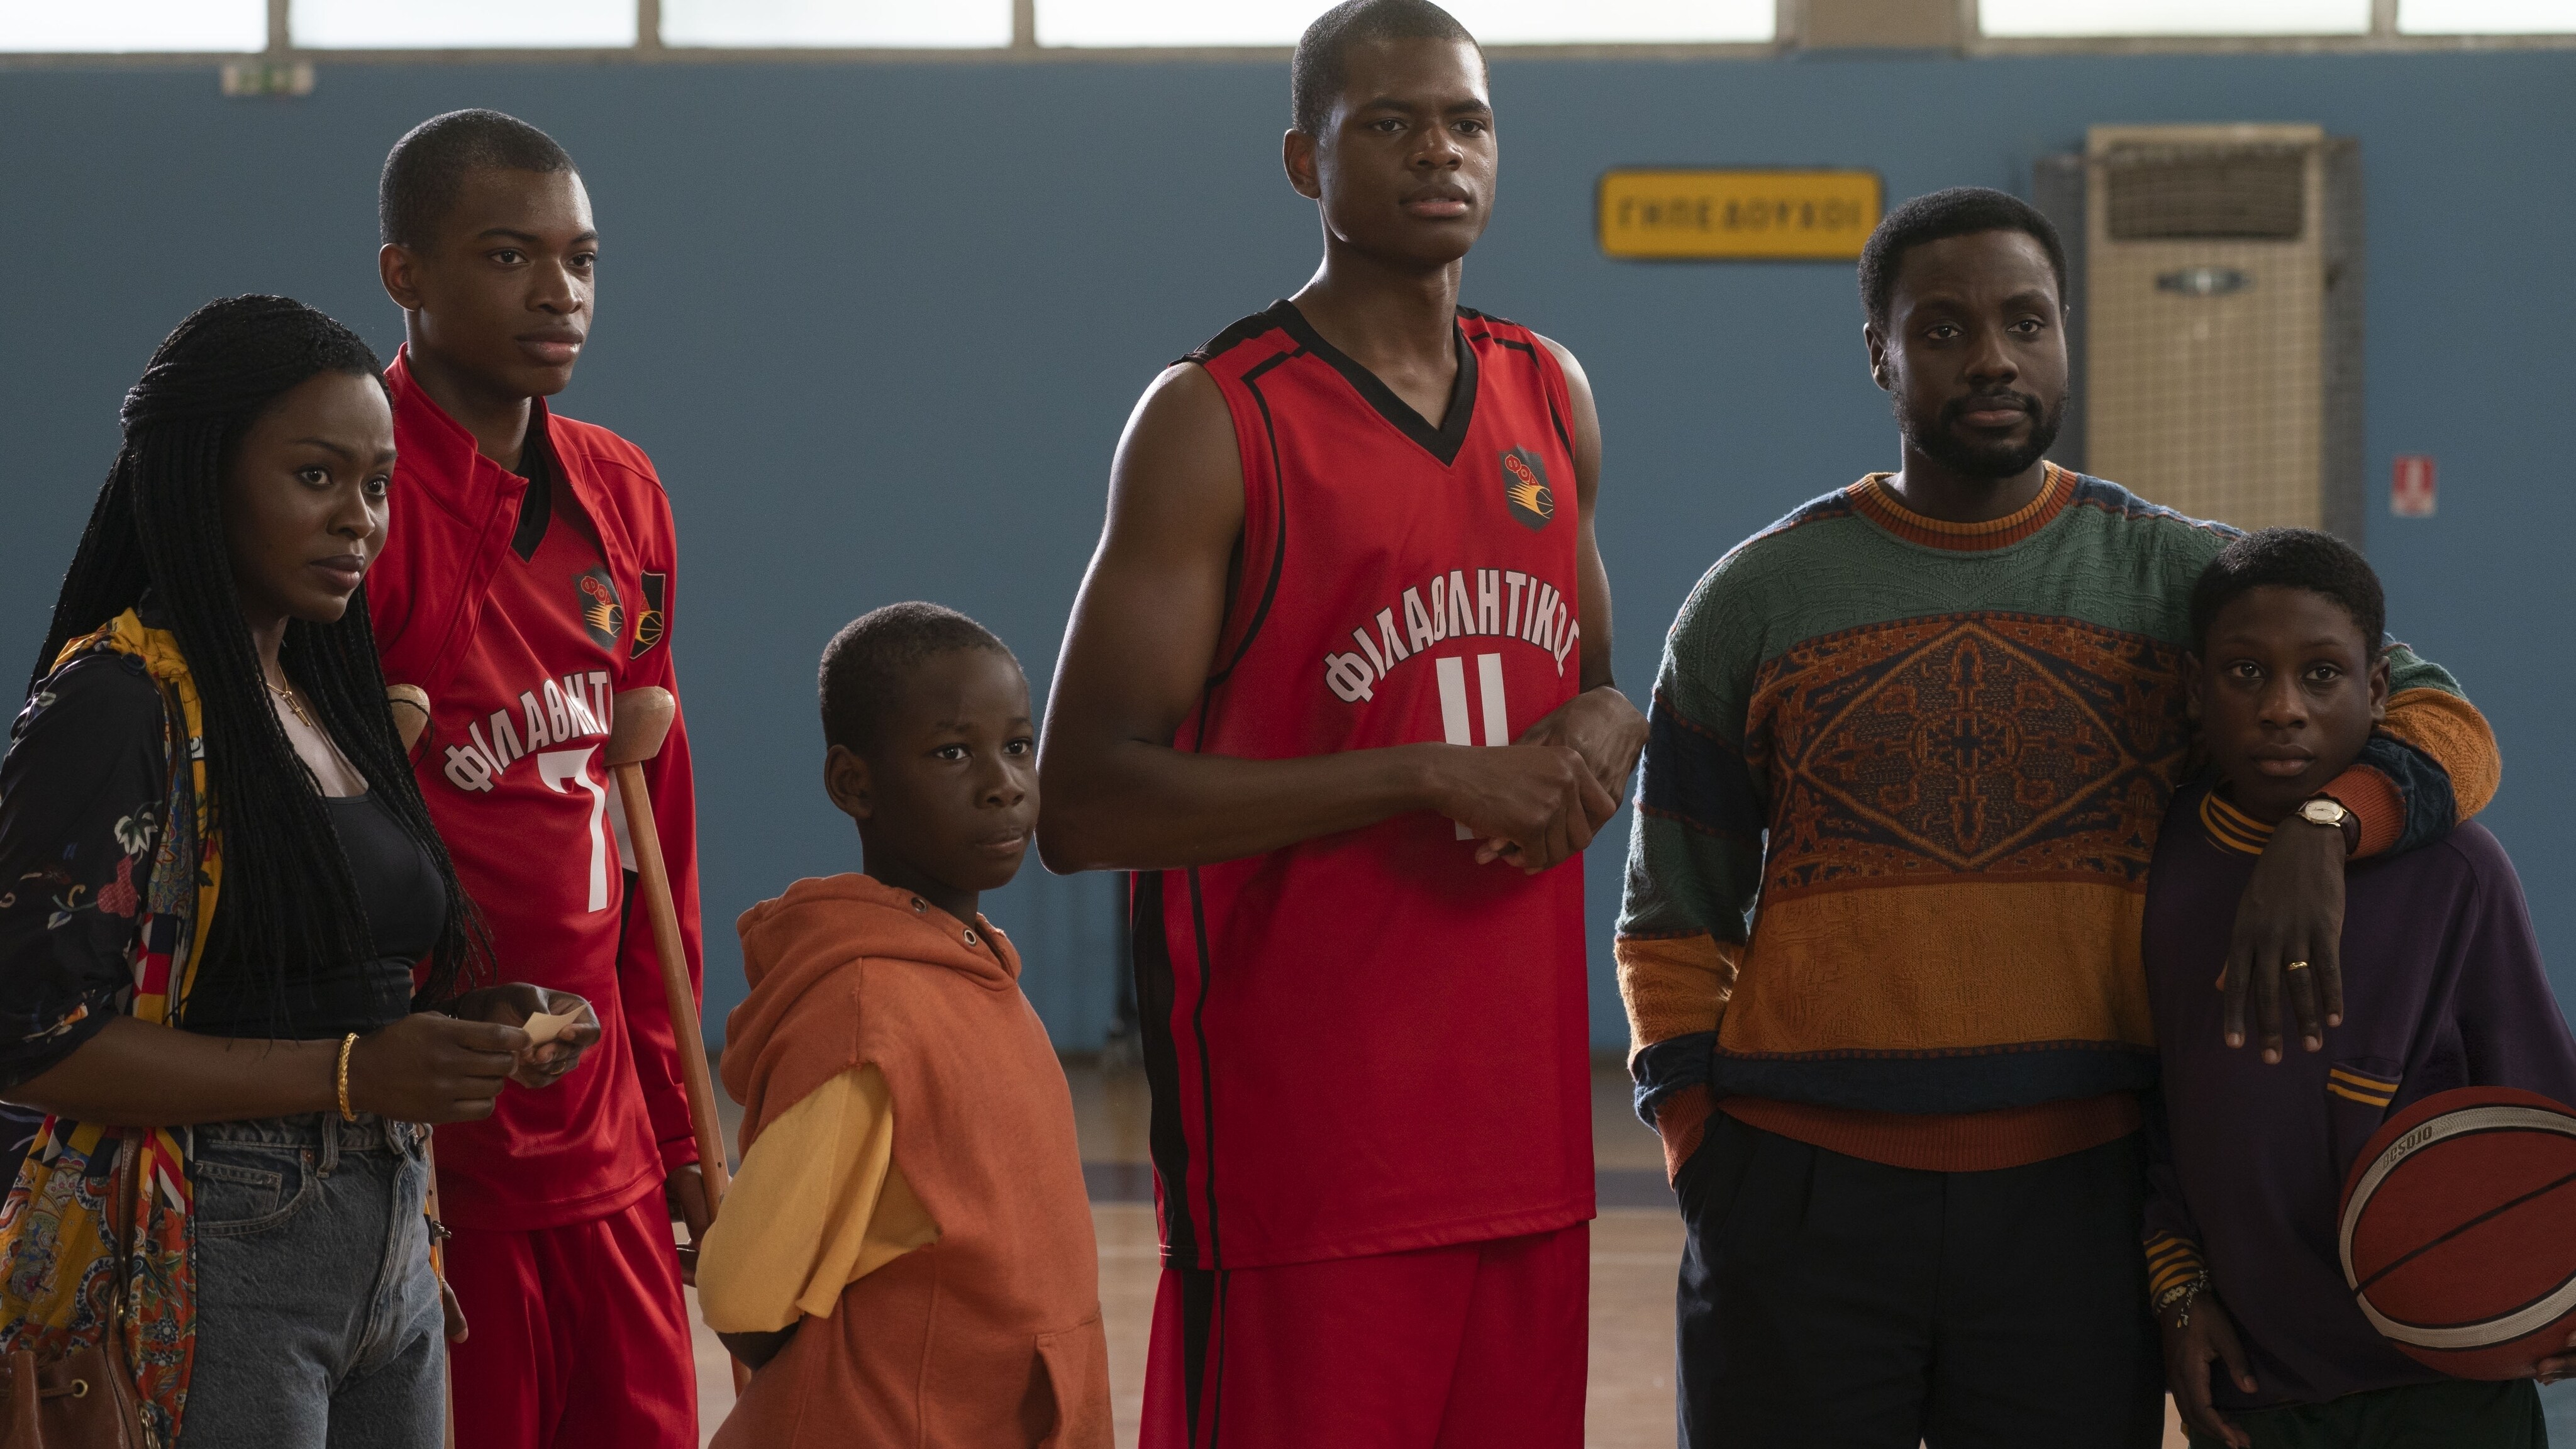 “Rise,” A New Film From Disney Based On The Triumphant Real Life Story About The Remarkable Family Behind NBA Champs Giannis, Thanasis And Kostas Antetokounmpo, And Their Younger Brother Alex, To Premiere In 2022 On Disney+